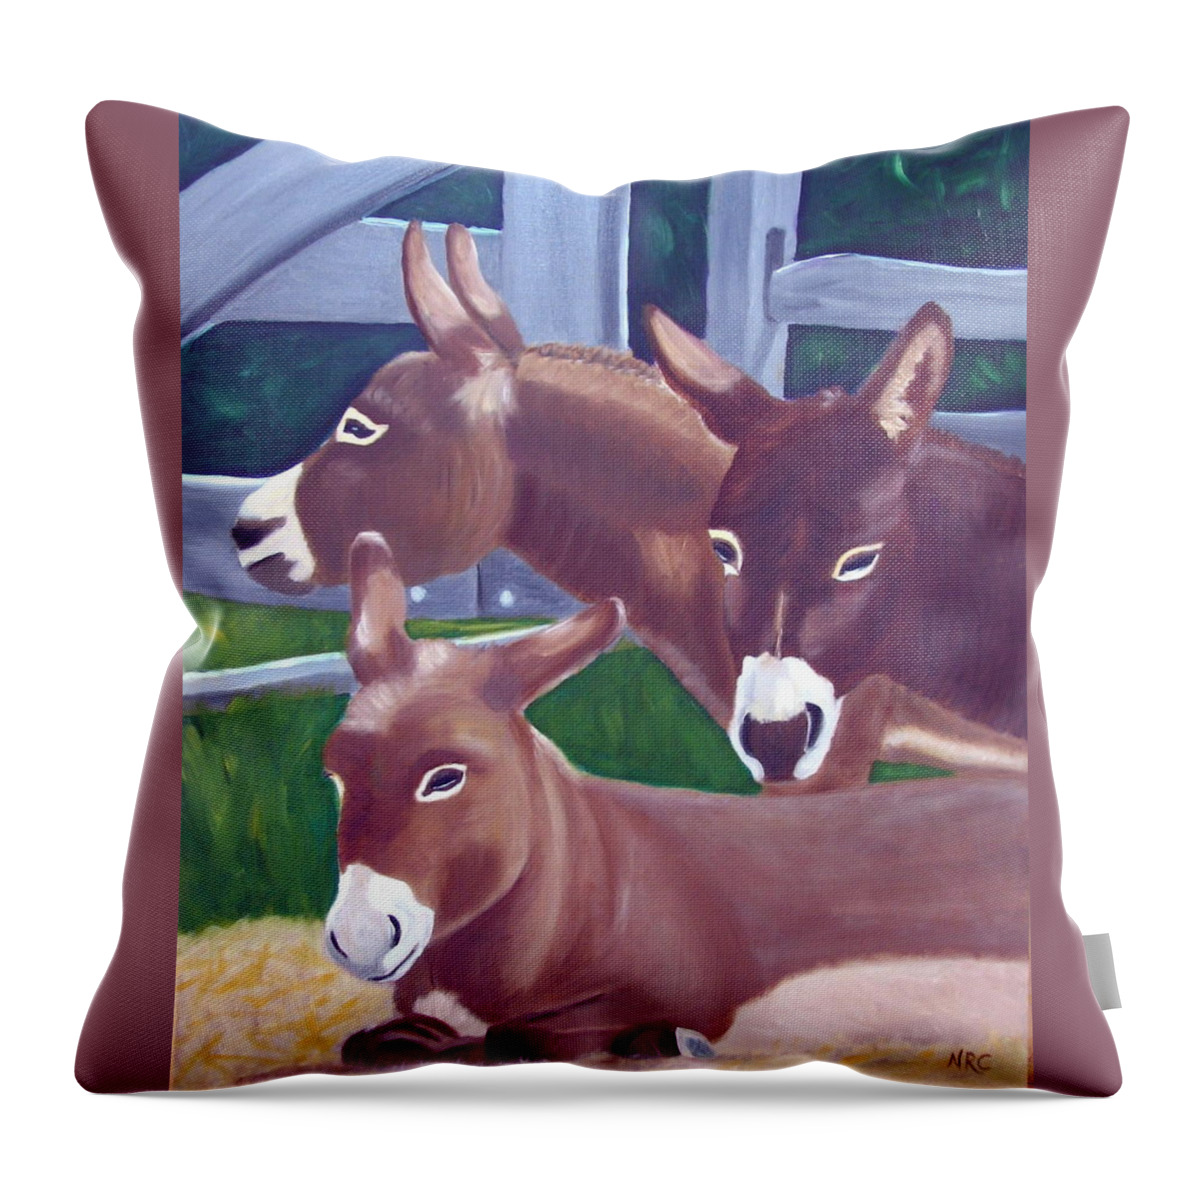 Donkey Throw Pillow featuring the photograph Three Donkeys by Natalie Rotman Cote